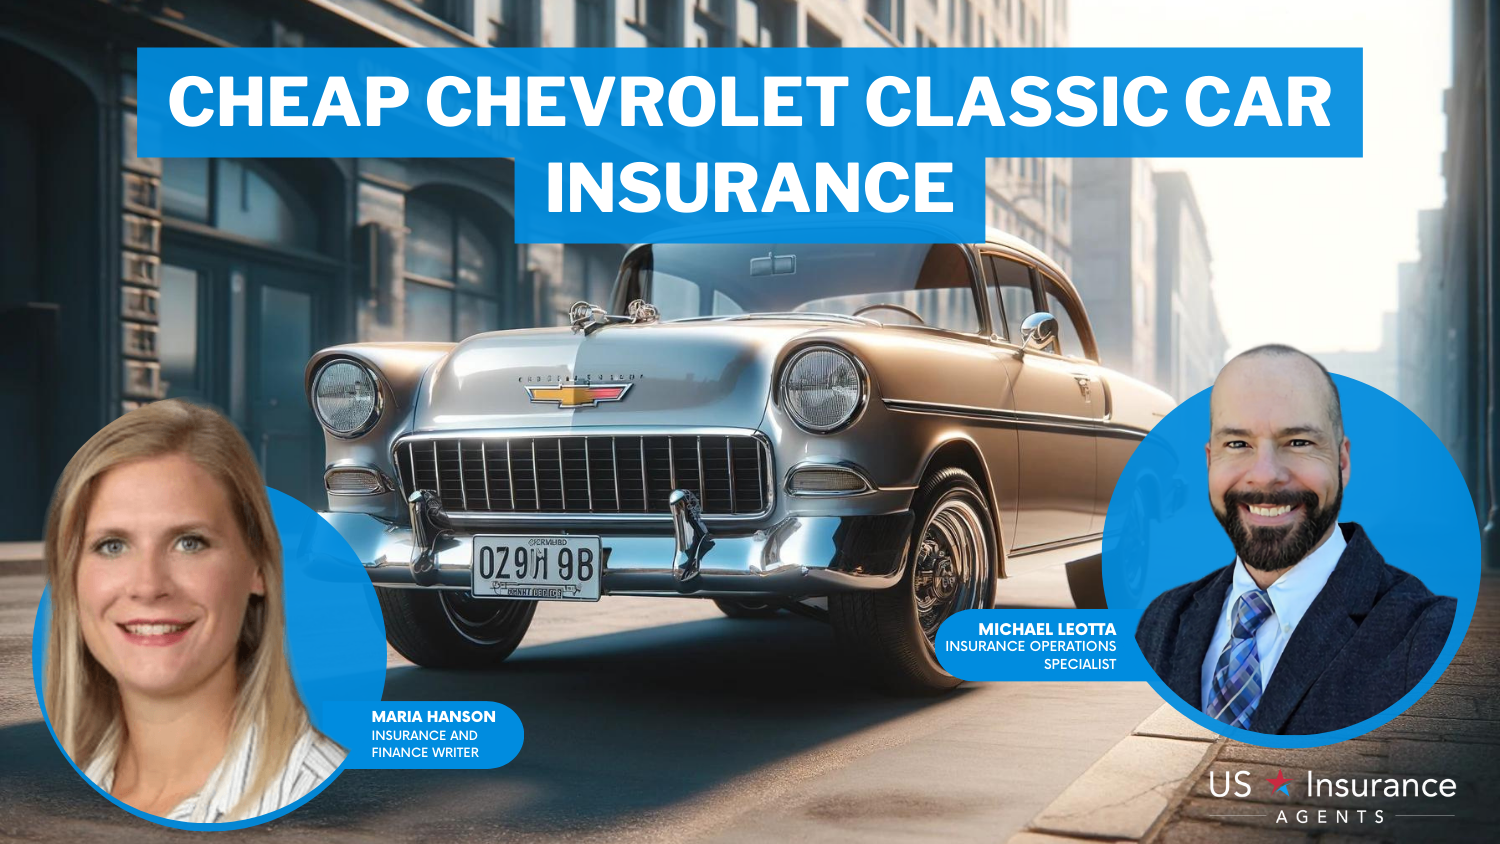 Cheap Chevrolet Classic Car Insurance: USAA, AAA, and State Farm